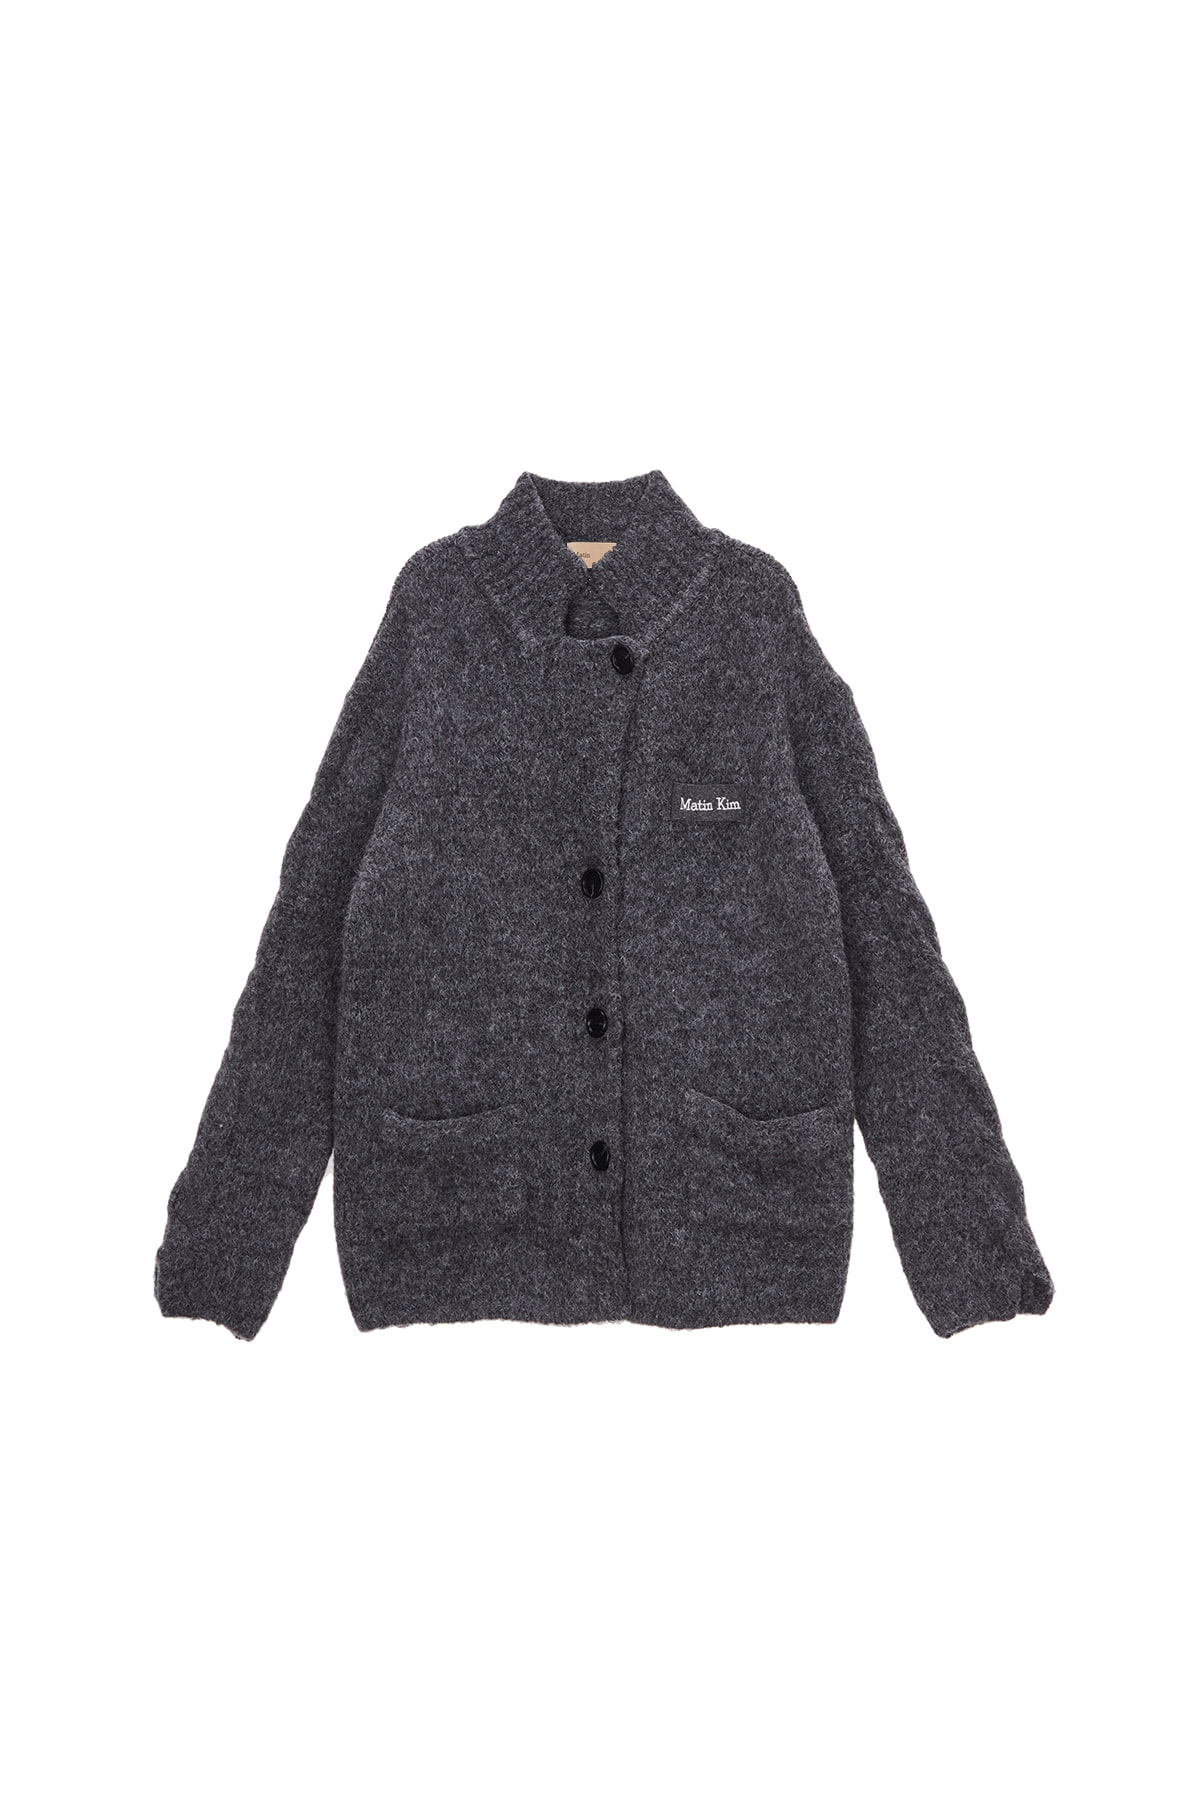 LOGO PATCHED KNIT CARDIGAN IN GREY